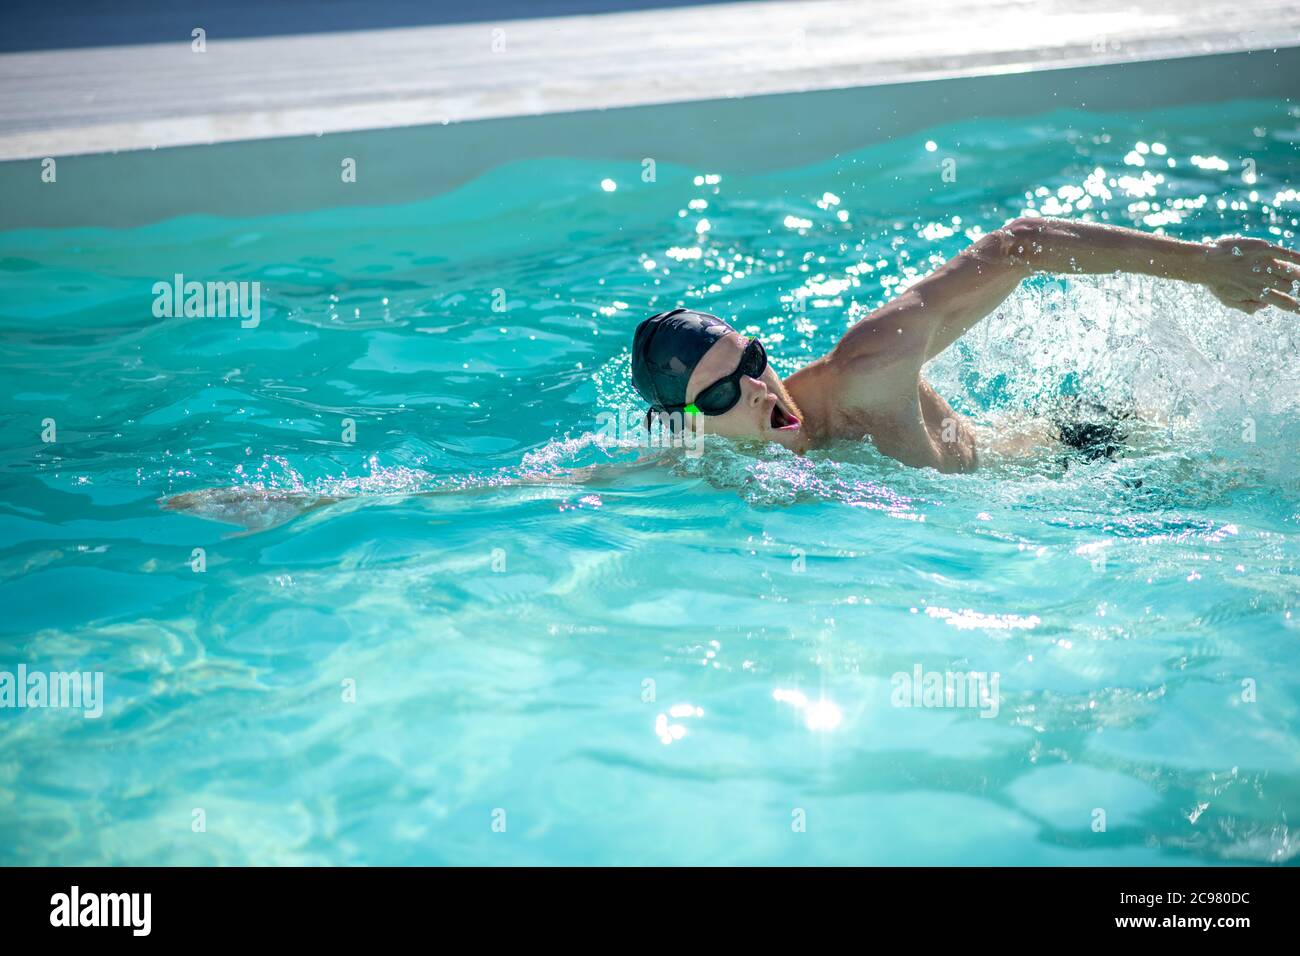 Fast swimmer in water on side mouth open Stock Photo